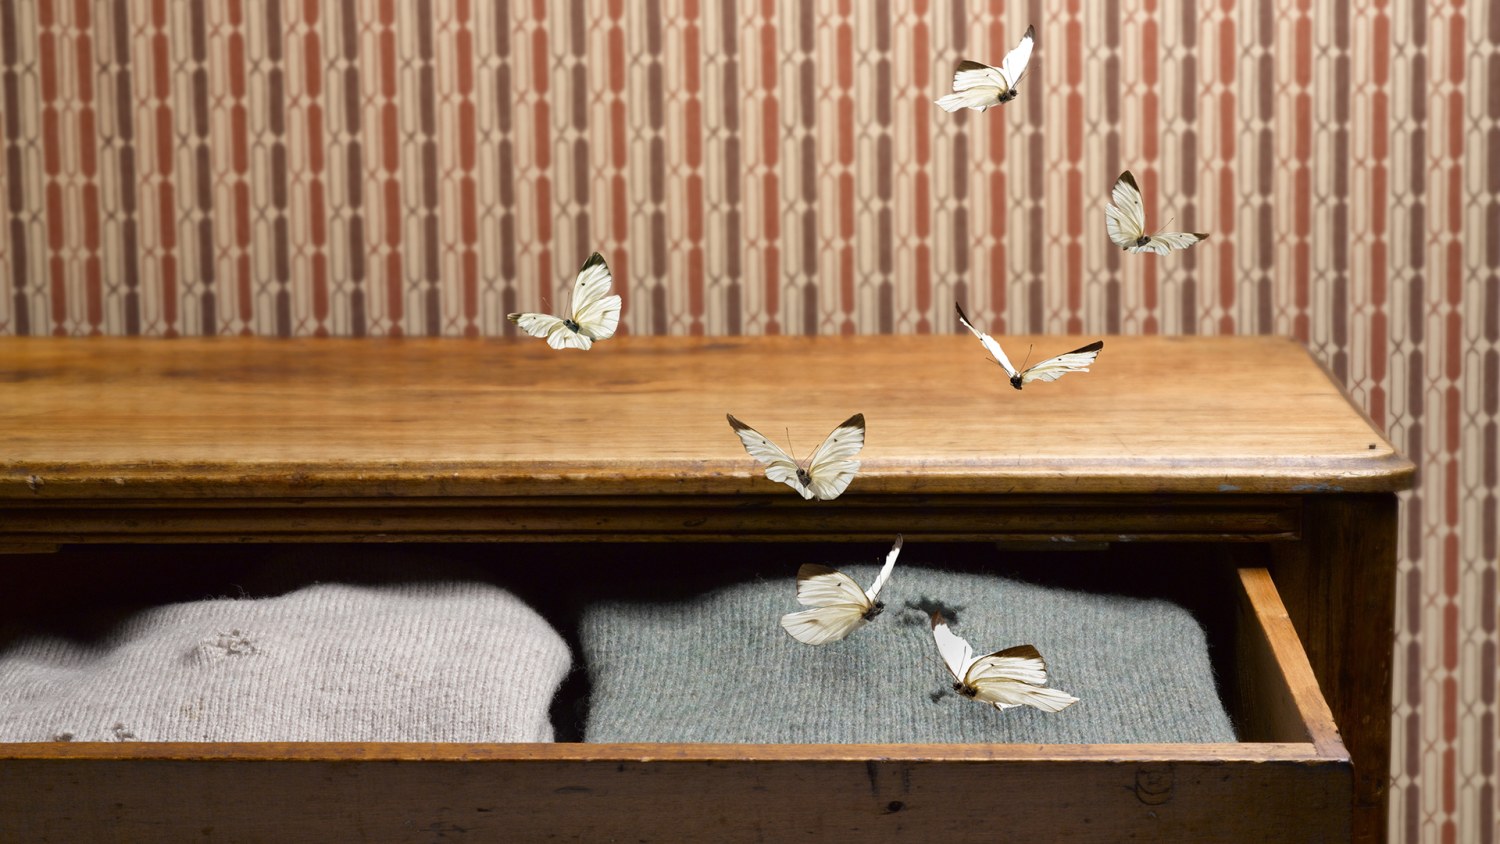 Why Clothing Moths Appear In Closets (And 7 Tips To Avoid Getting Them)